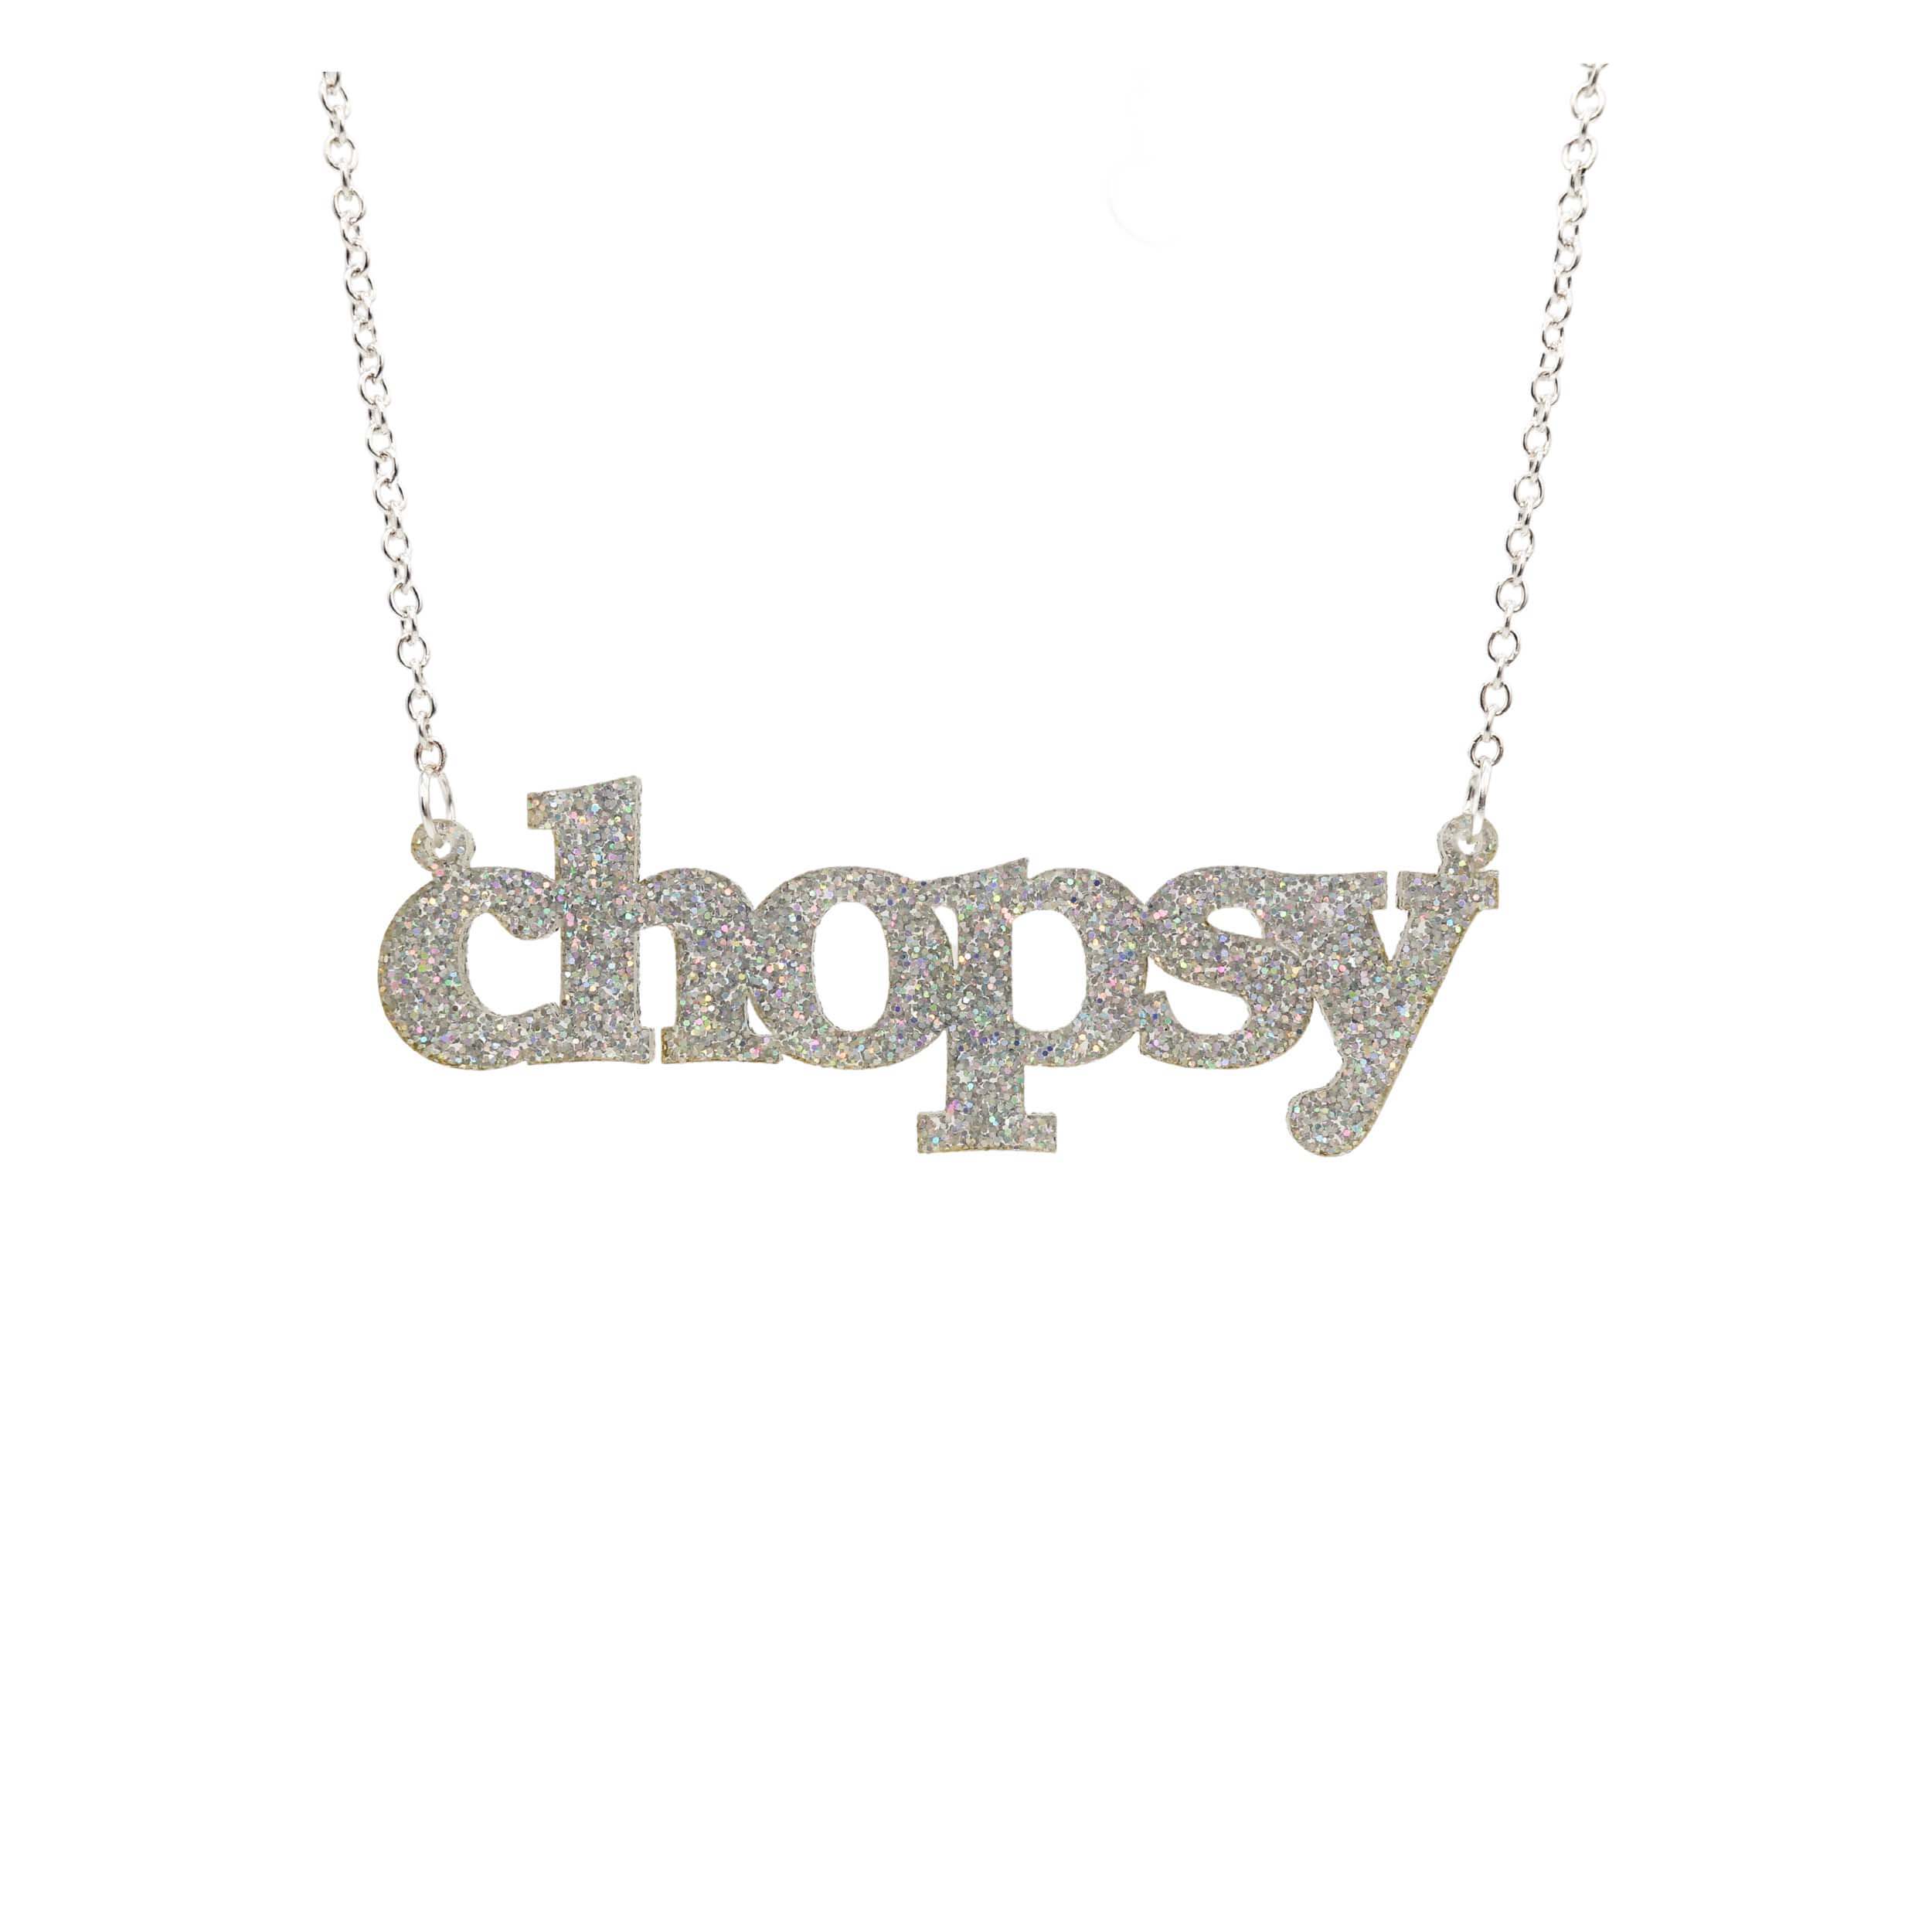 Silver glitter Chopsy necklace shown hanging against a white backround. 